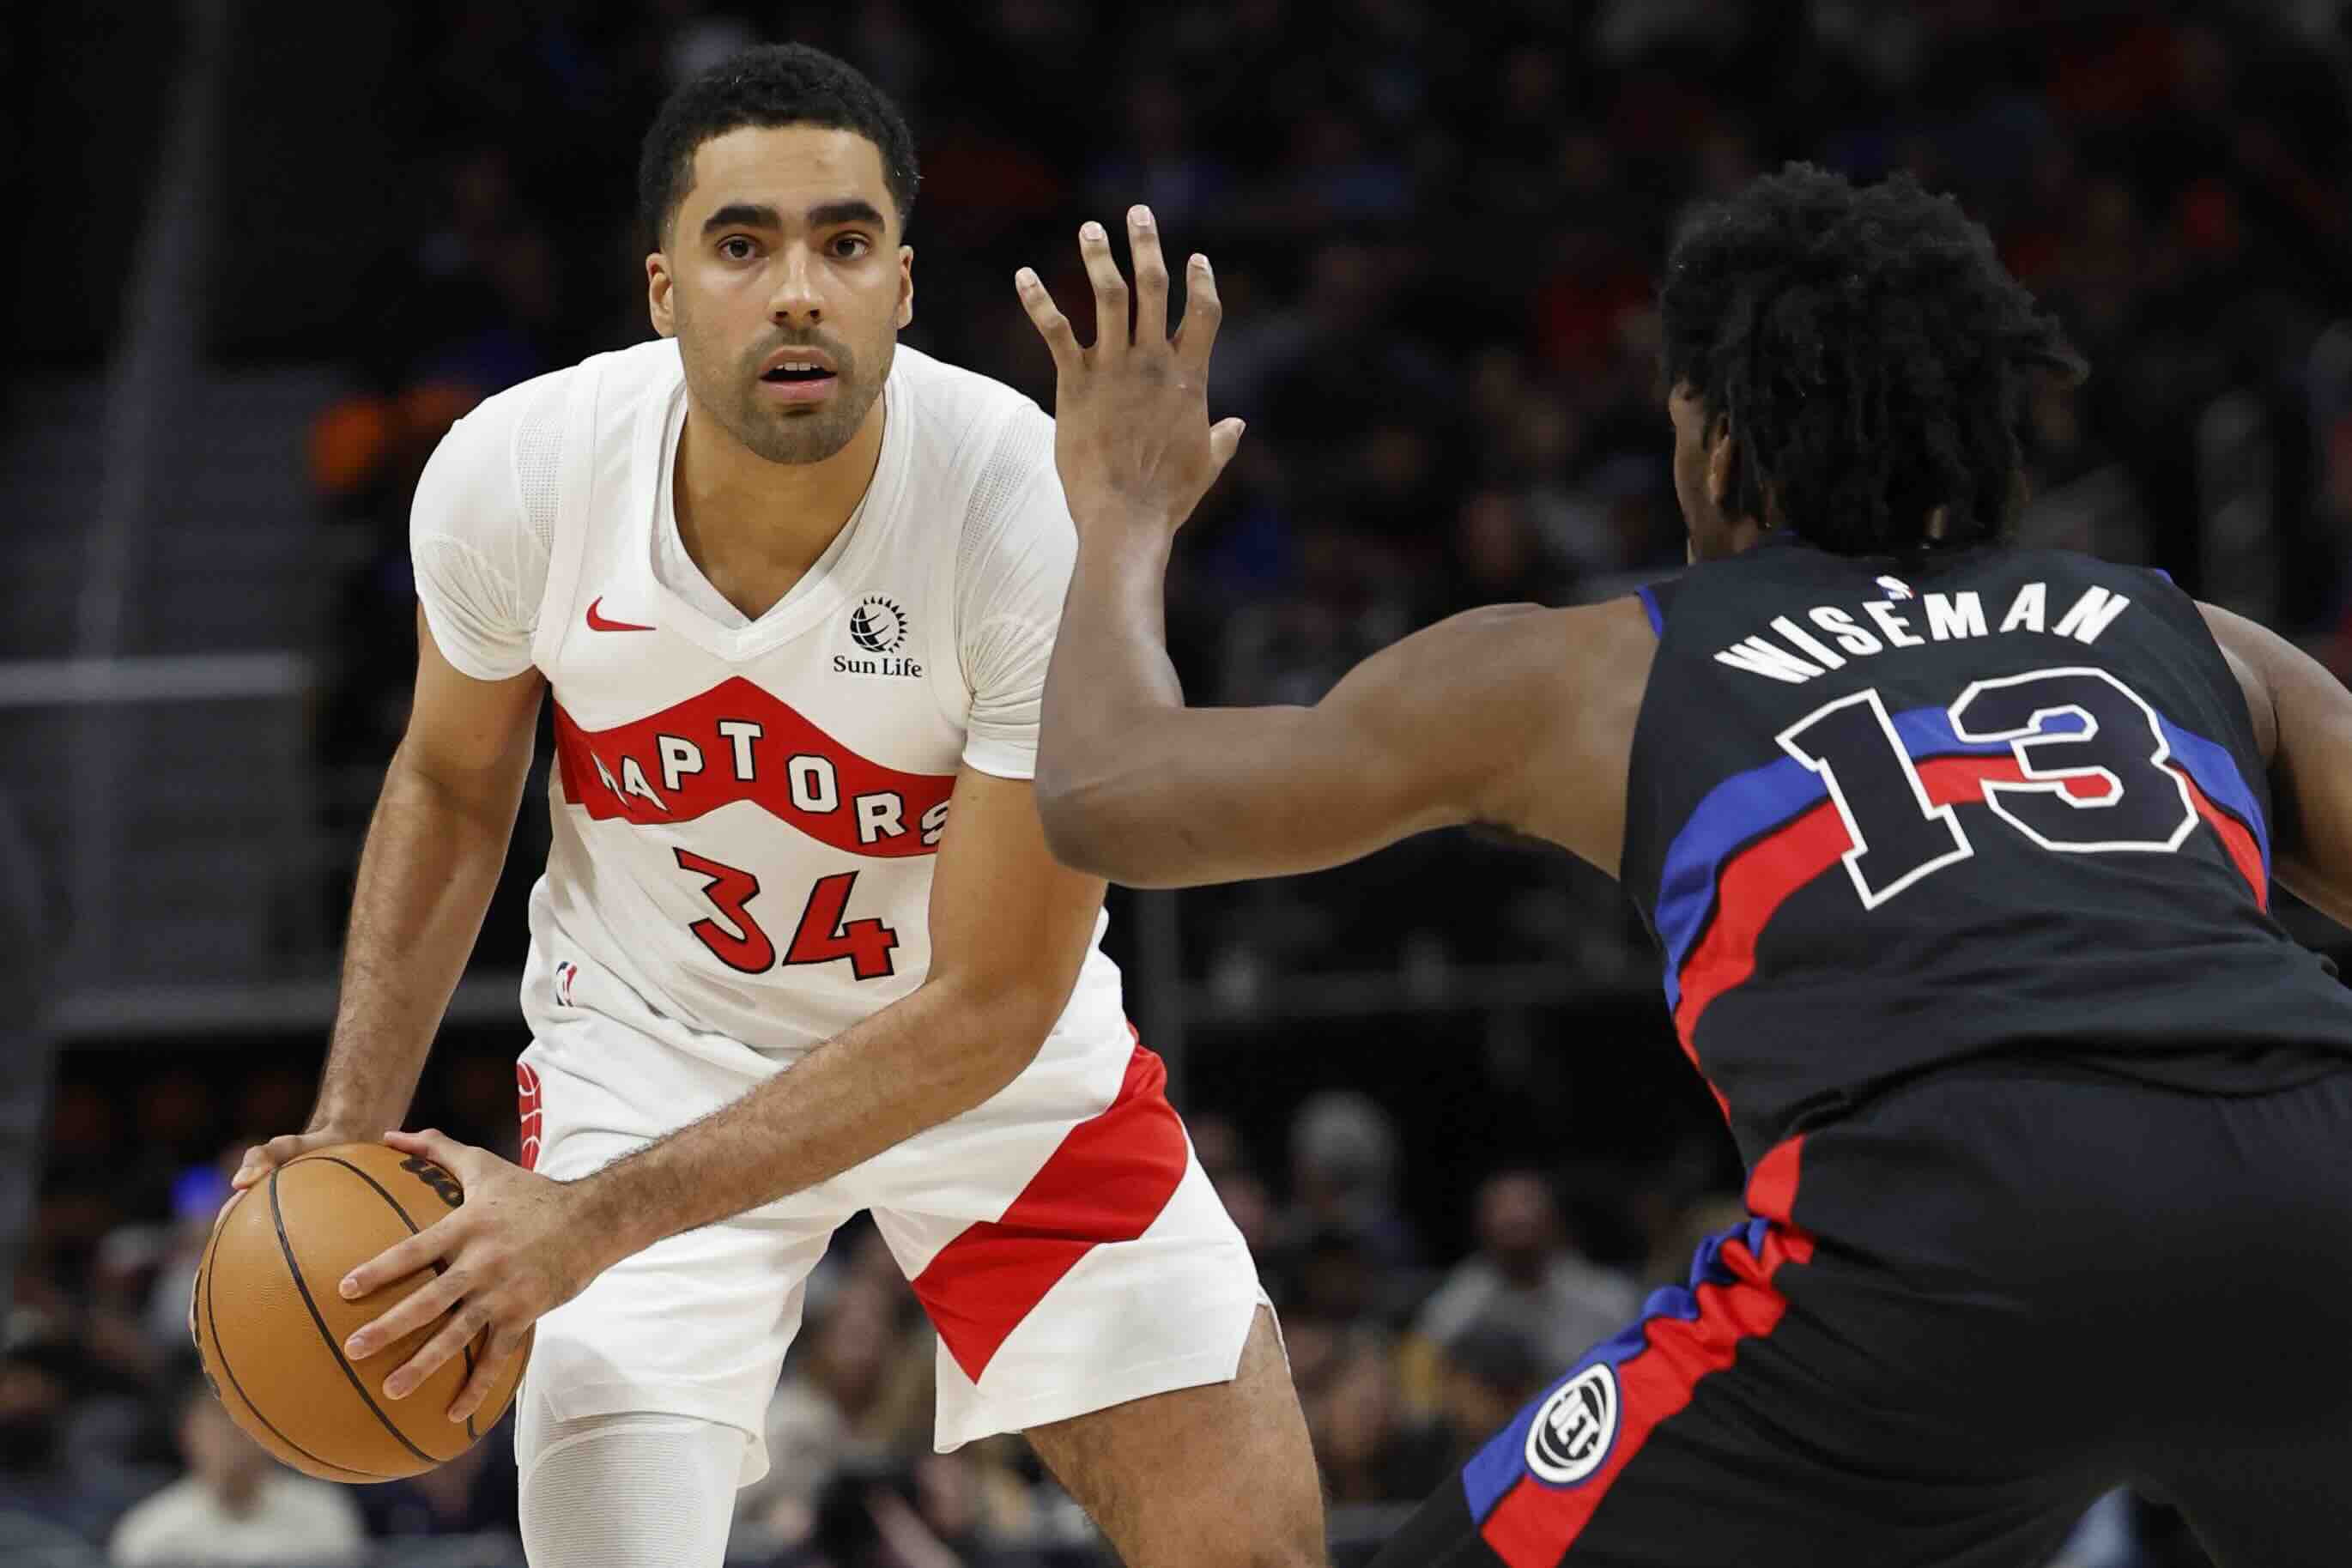 The NBA is investigating Toronto Raptors forward Jontay Porter for his role in betting irregularities this season, ESPN reported Monday.